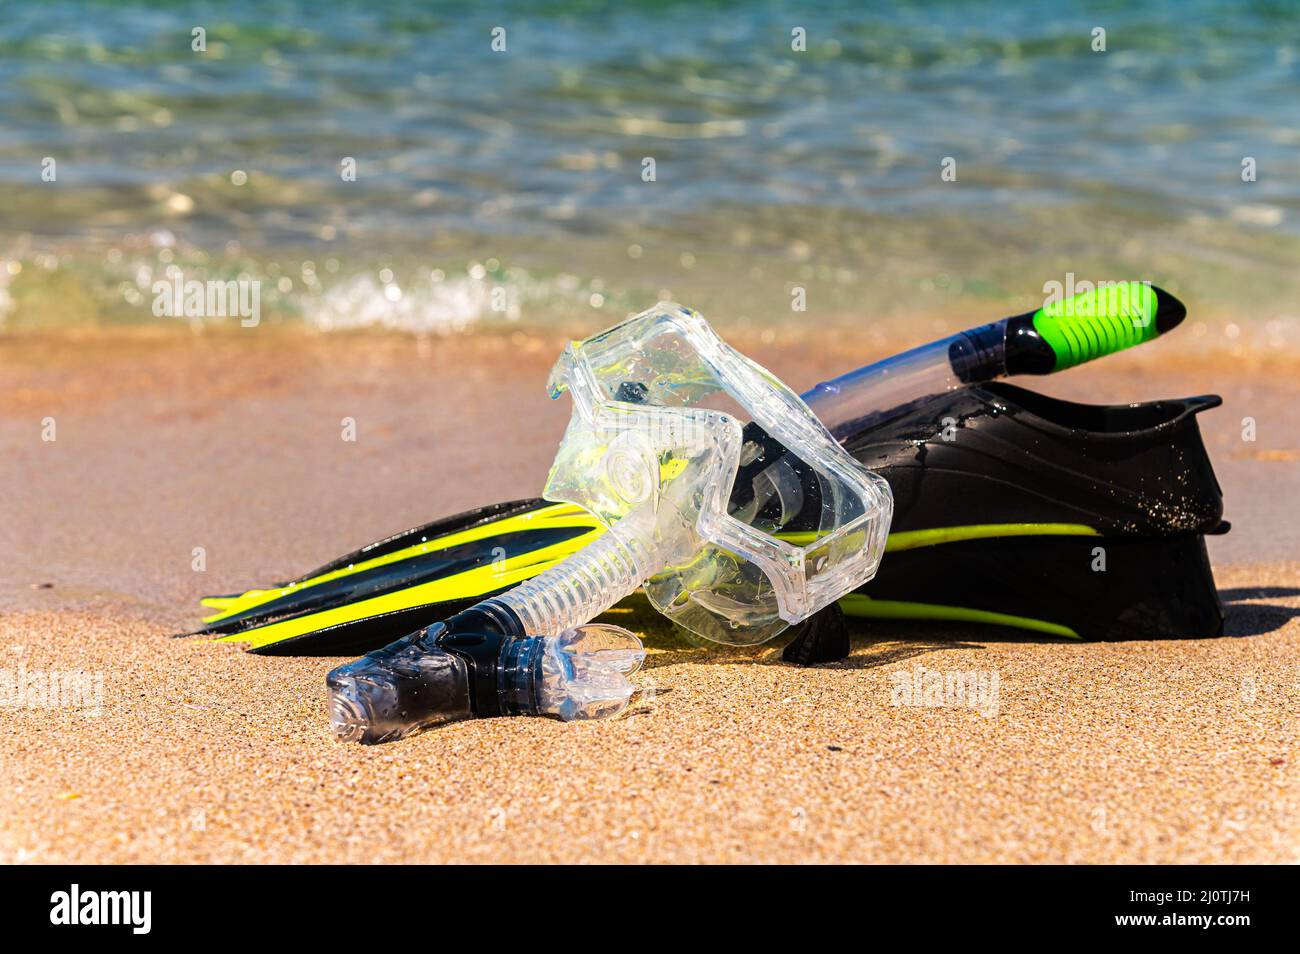 Snorkeling equipment on the sand with ocean waves splashing the water. Black fins, black mask, snorkel on sandy texture backgrou Stock Photo